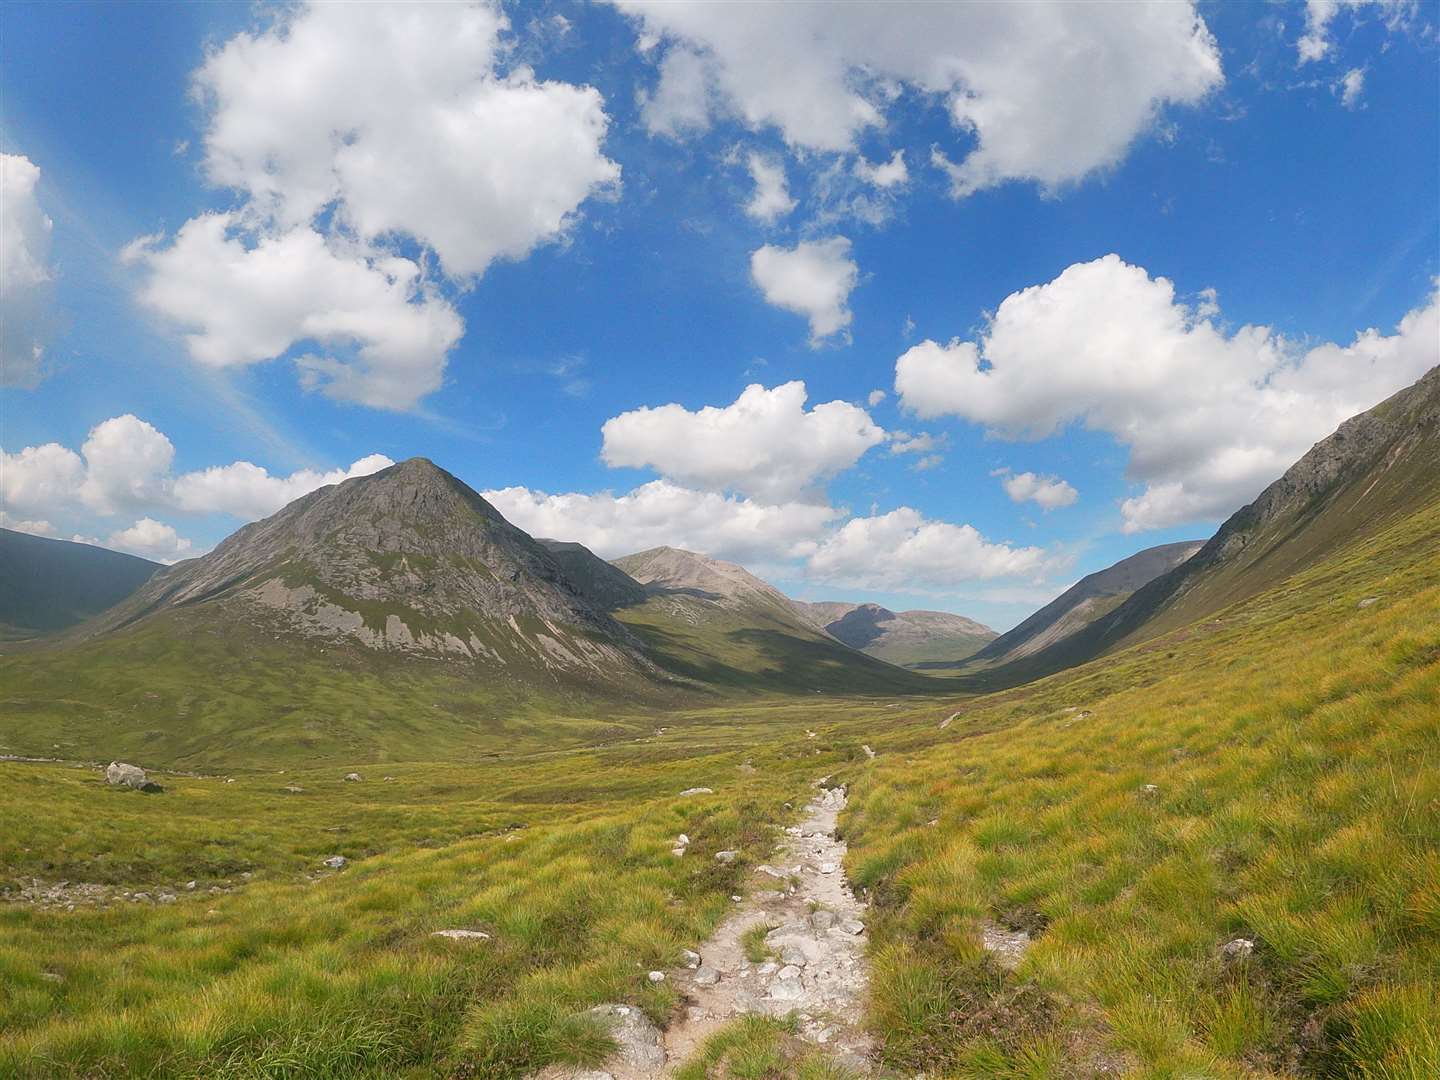 Entering the Lairig Ghru with the Devil's Point, Bod an Deamhain, on the left.